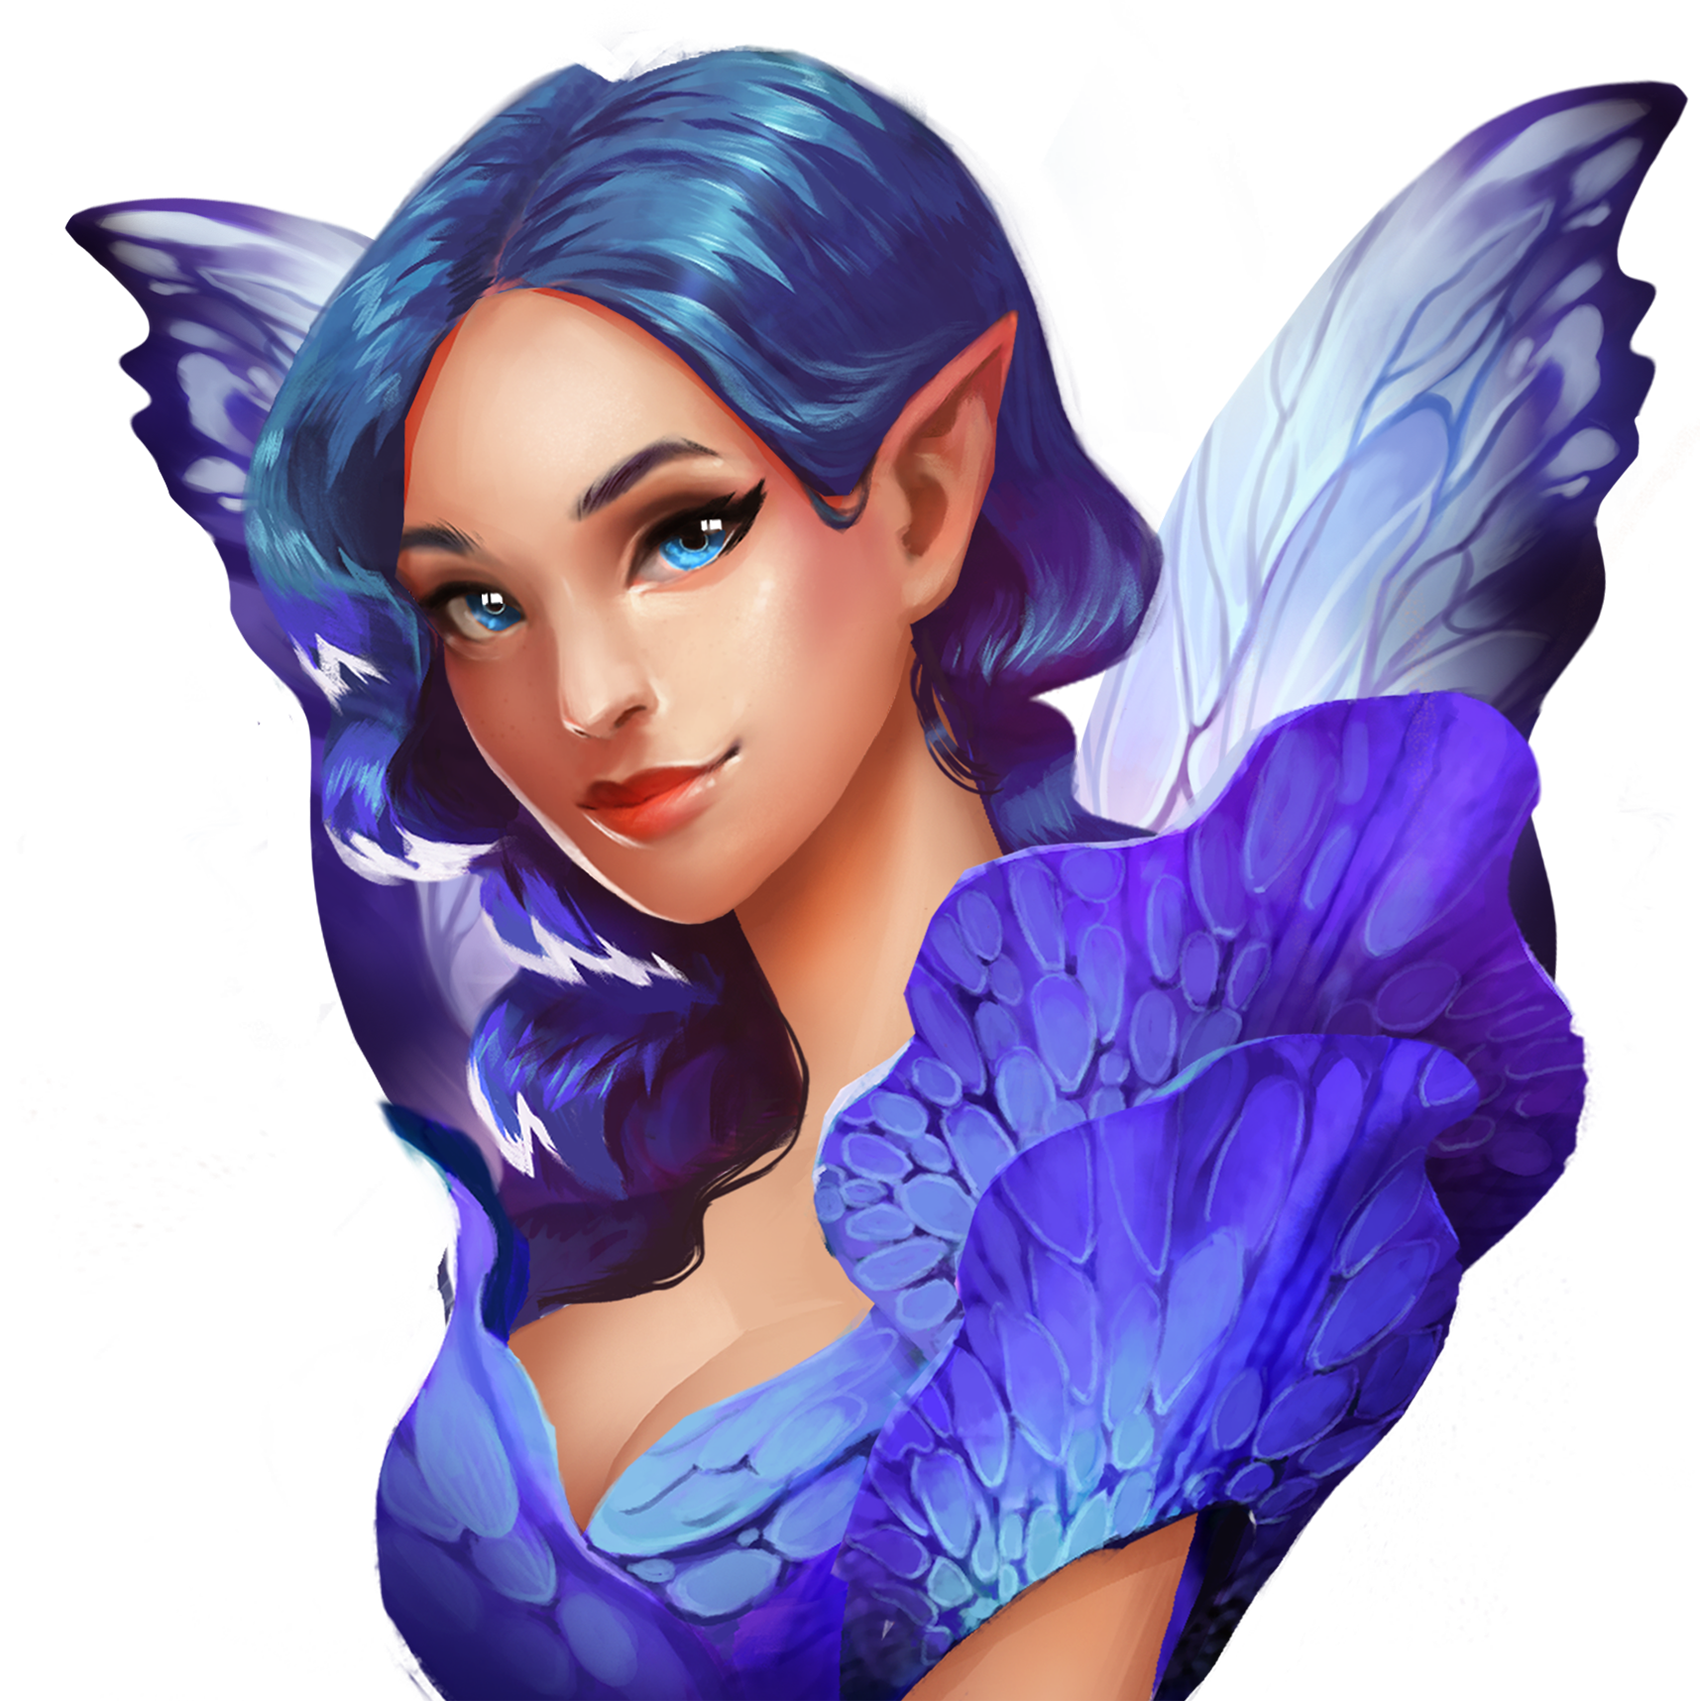 17_character_sym6 blue fairy_wingsofriches.png thumbnail